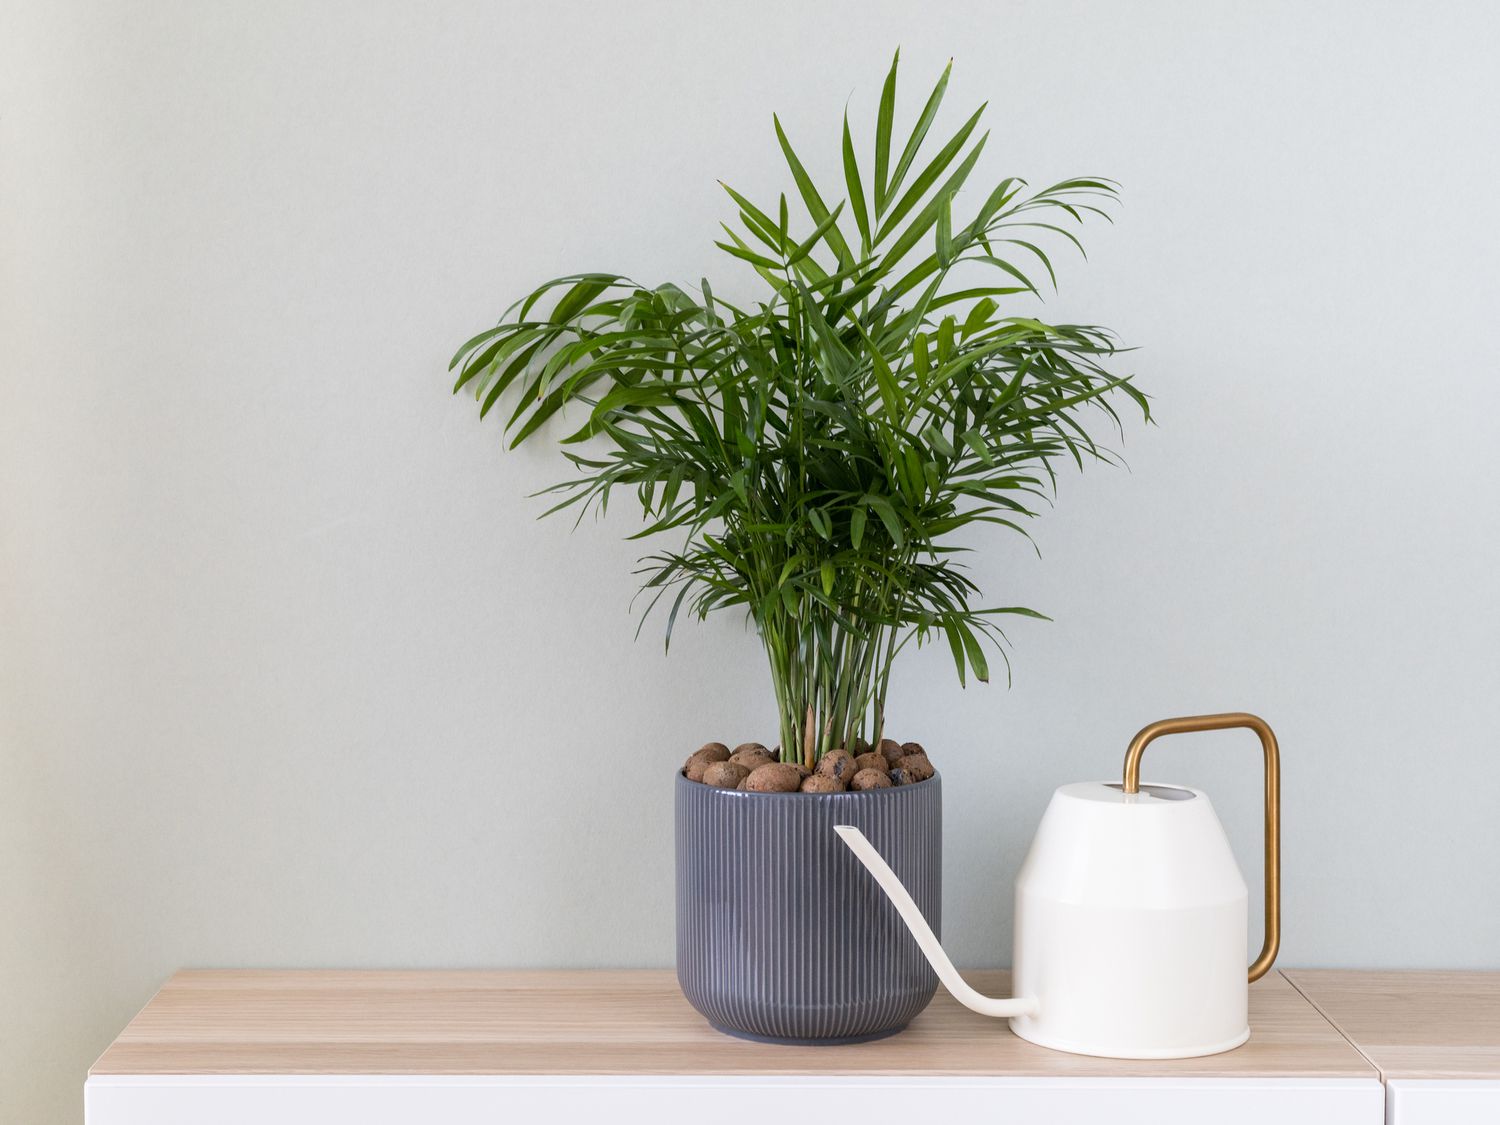 Neanthe Bella Palm in grey planter with white watering can on wooden counter.